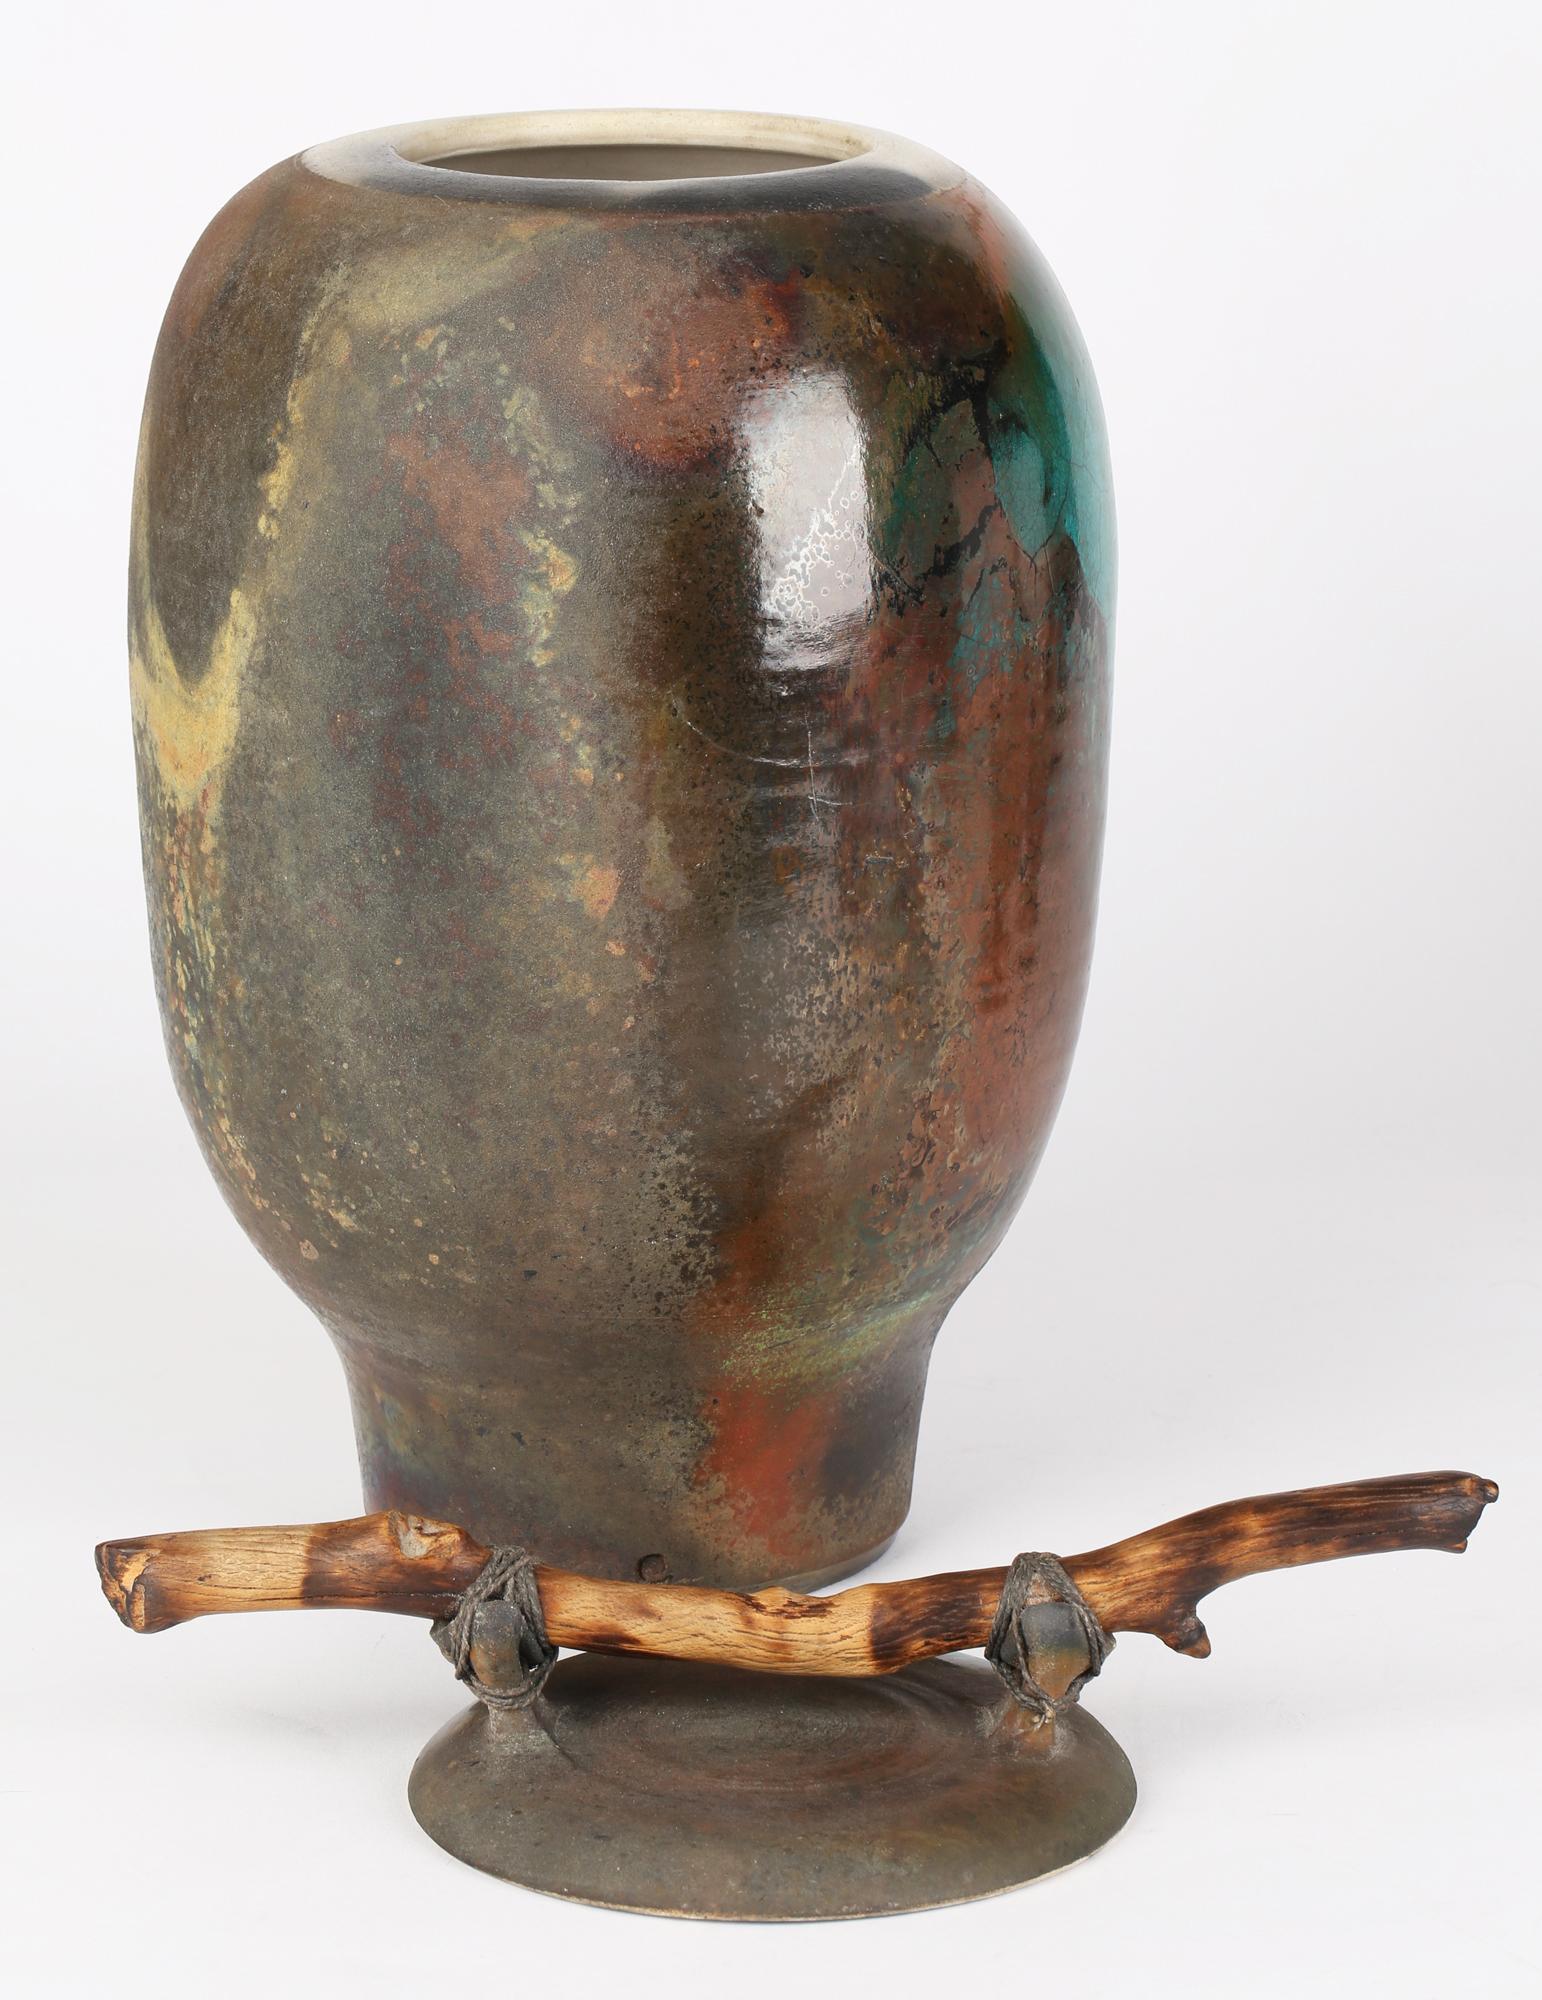 A large and very impressive British attributed studio pottery raku glazed lidded jar with drift wood handle signed CR and dating from the 20th century. The jar hand thrown in white clay stands on a narrow flat round base with a narrow lower section